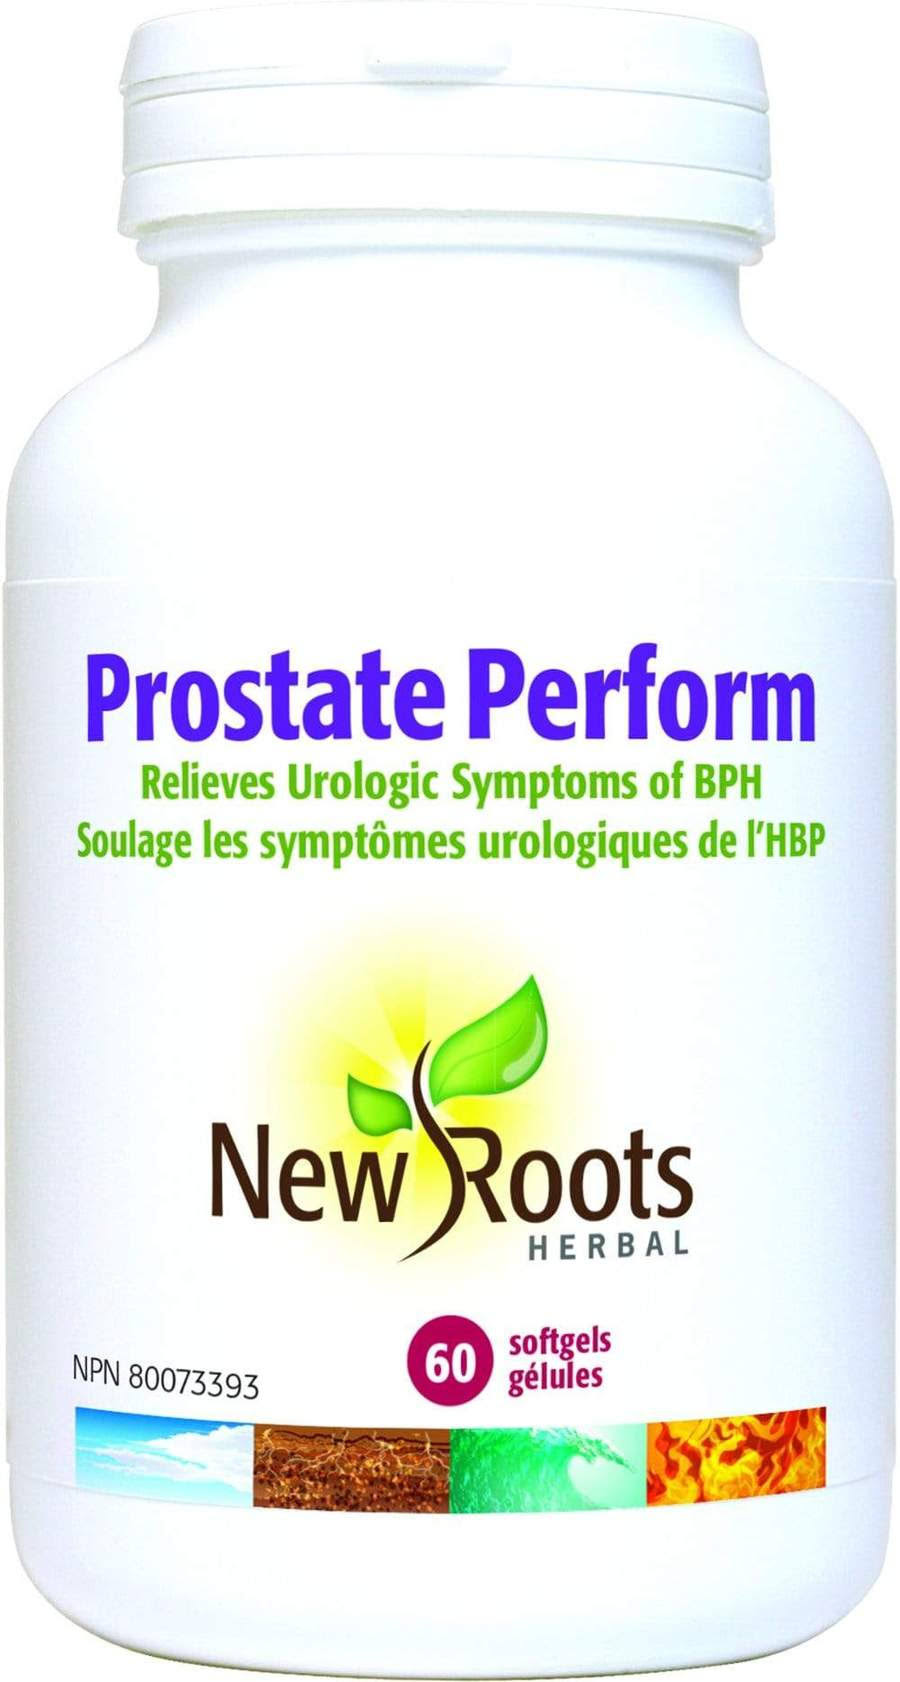 New Roots Herbal Certified Organic Prostate Perform Softgel - 60ct